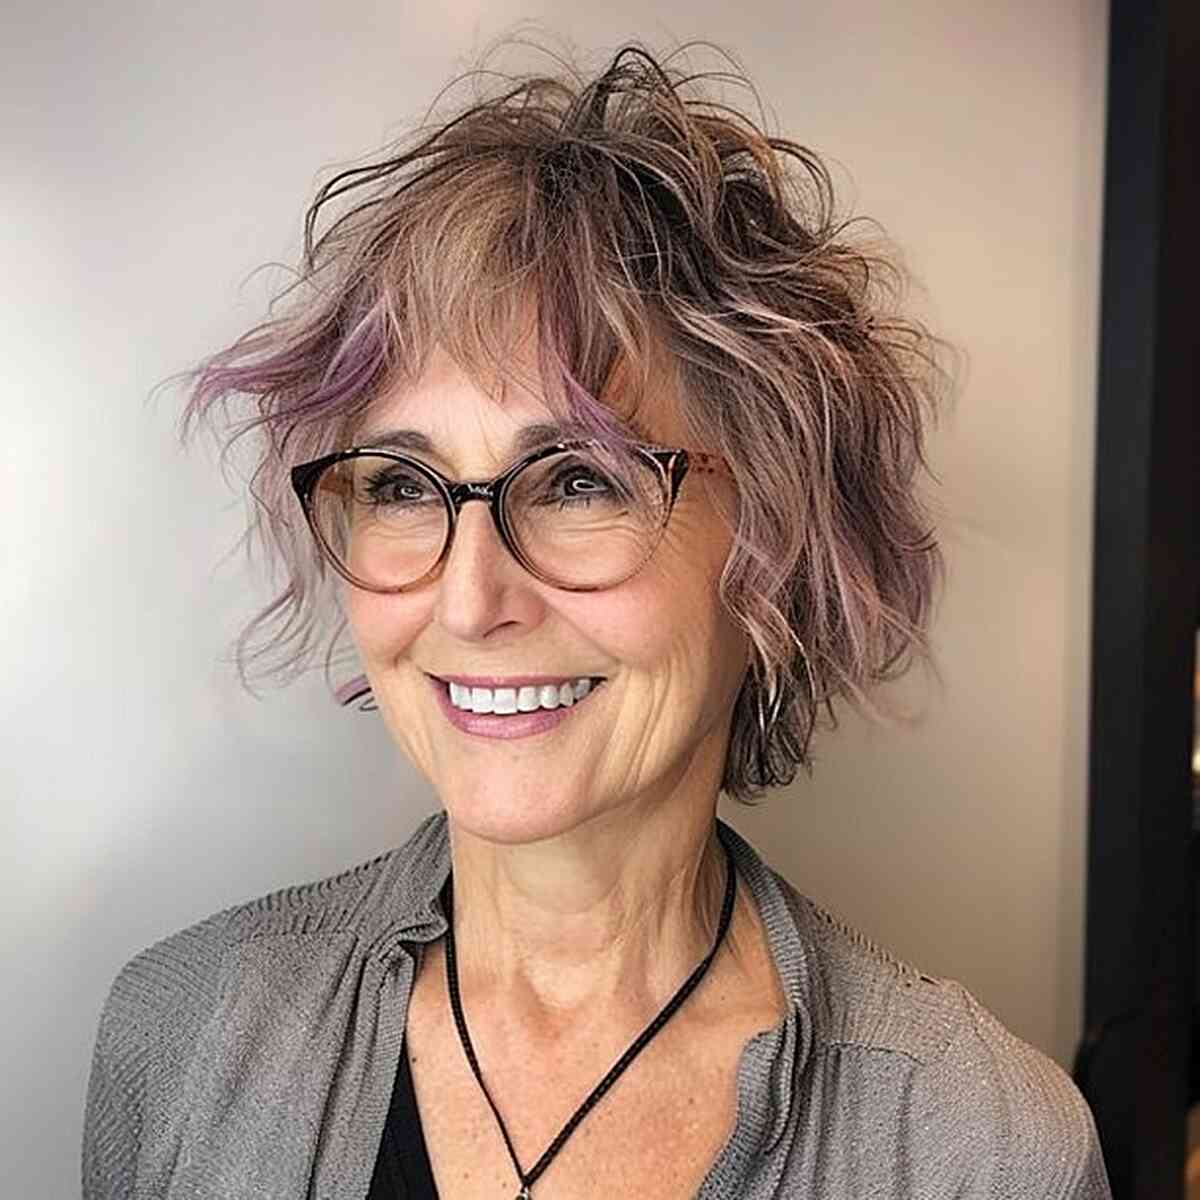 Edgy Layered Haircut for Thin Haired Women Over 50 with Glasses